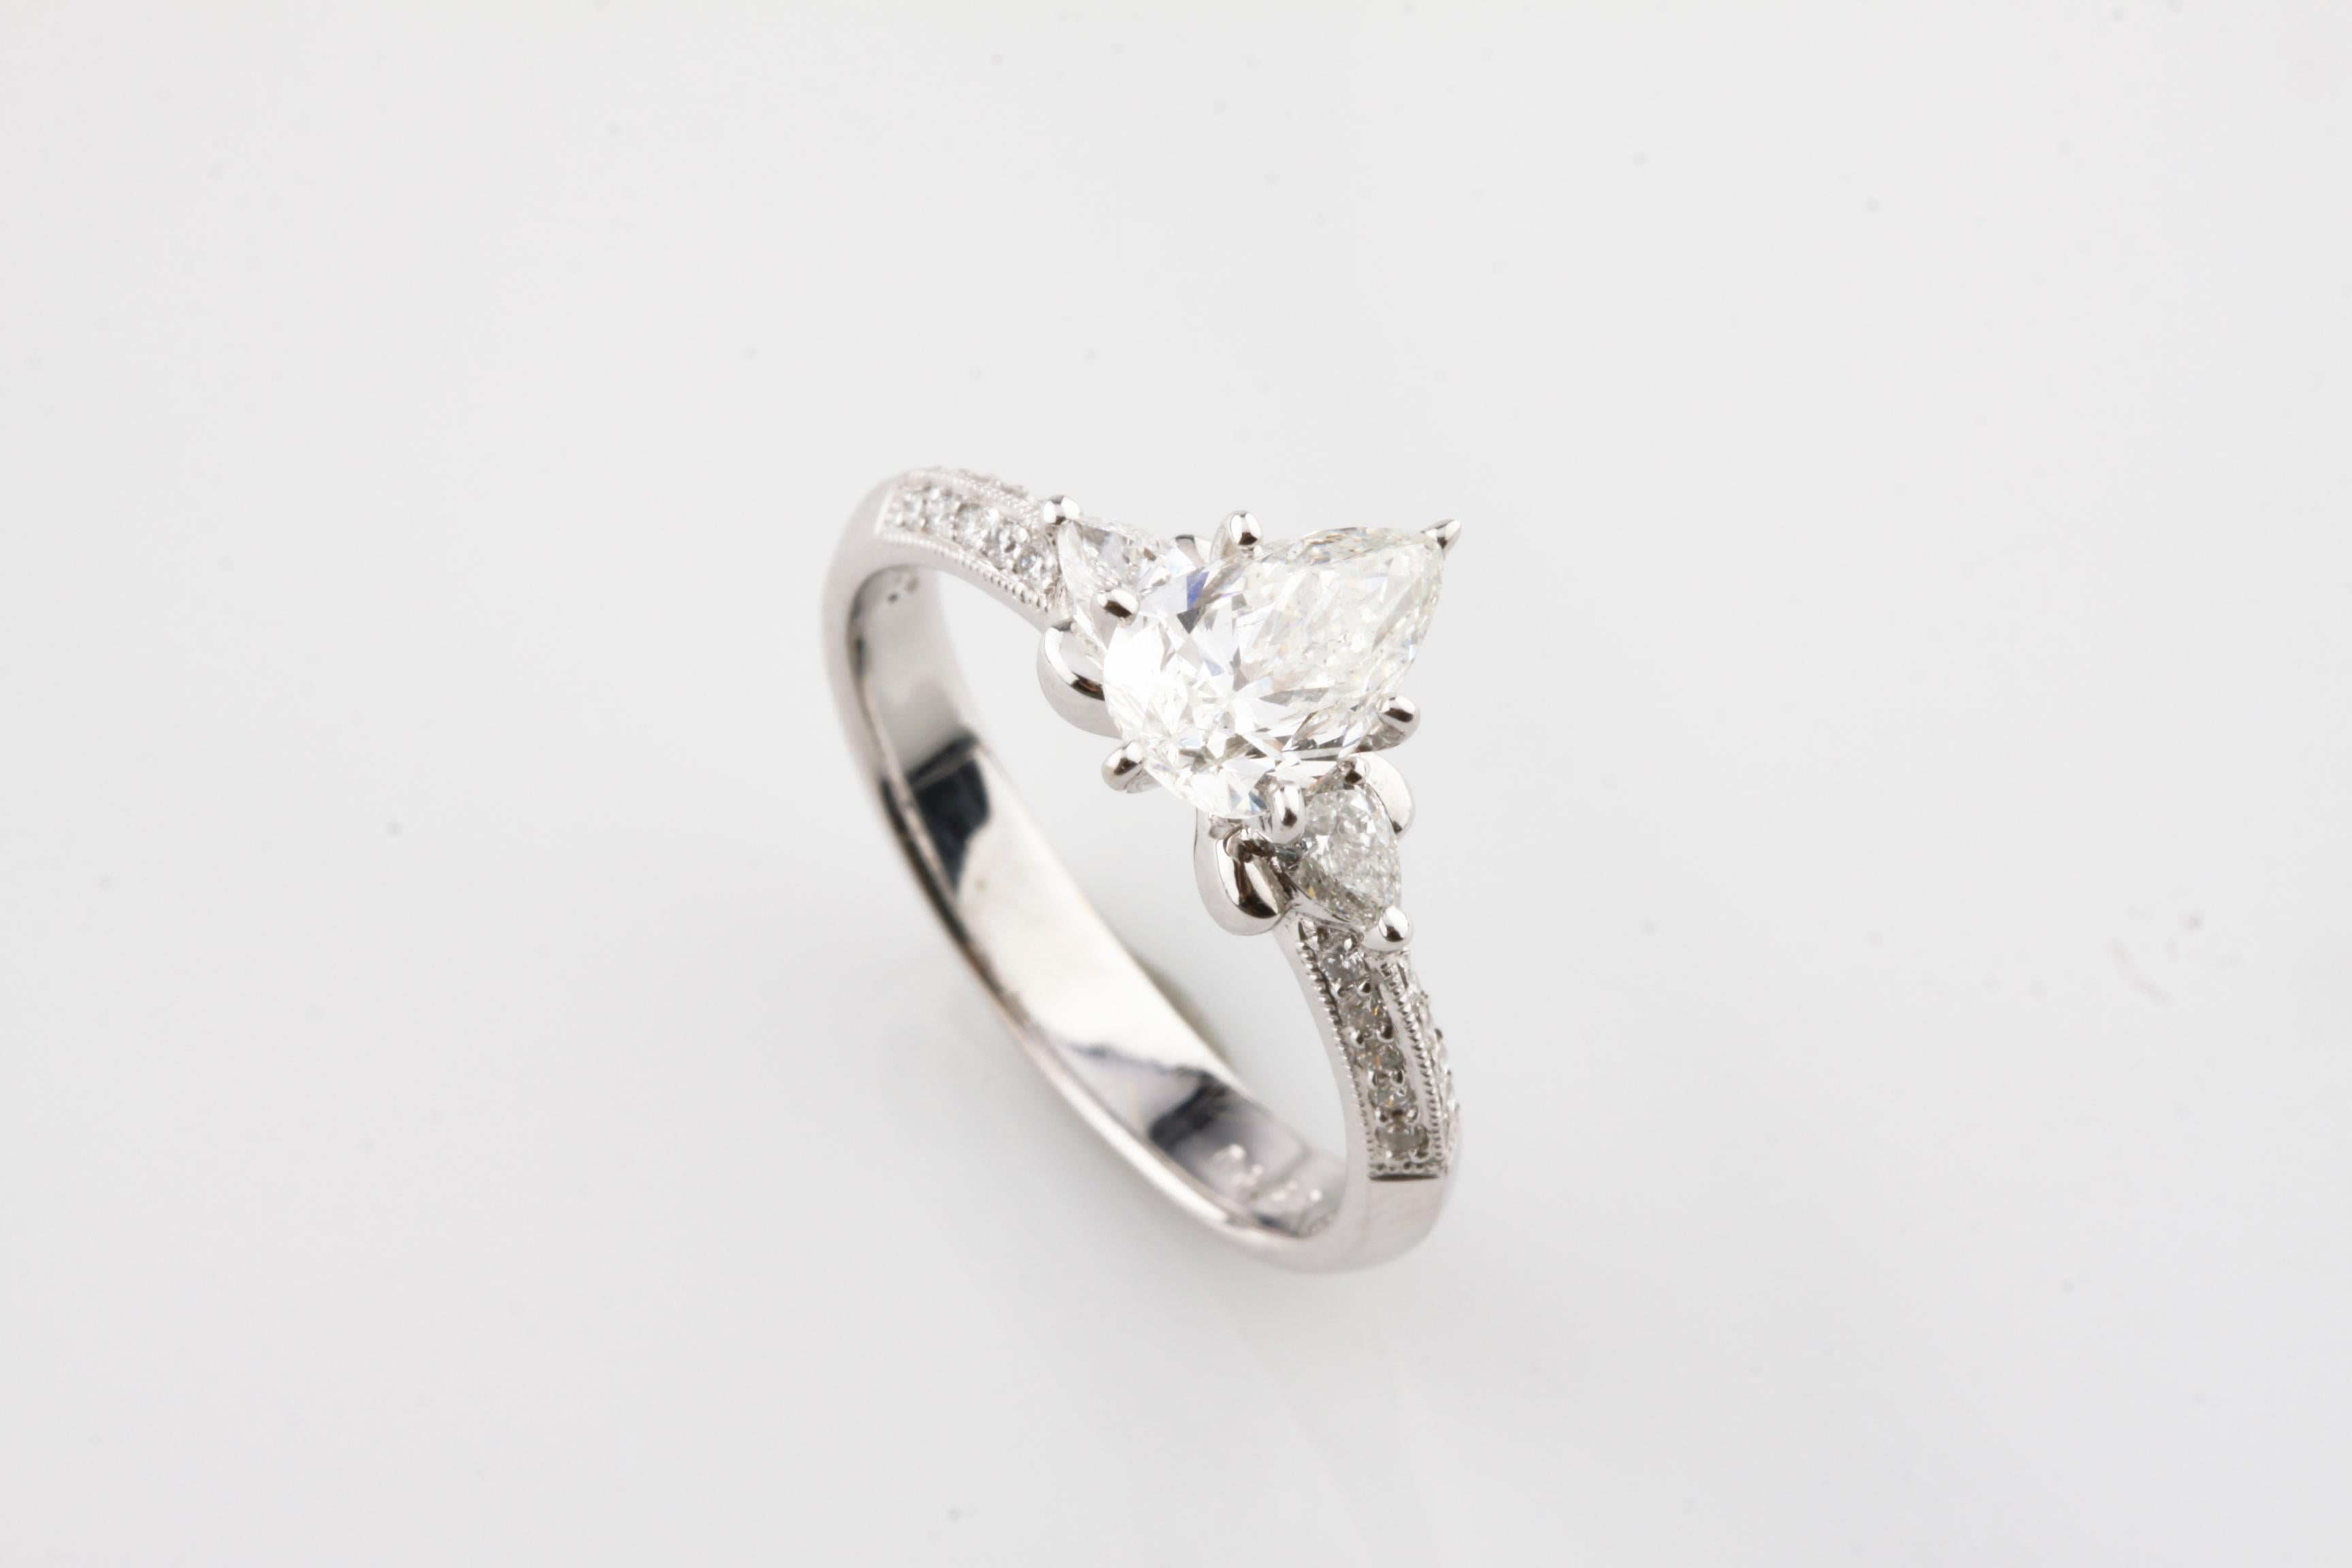 One electrically tested 18KT white gold ladies cast & assembled diamond unity ring with a bright finish. Condition is new, good workmanship. The ring features a diamond solitaire, supported by diamonds set shoulders, completed by a three millimeter